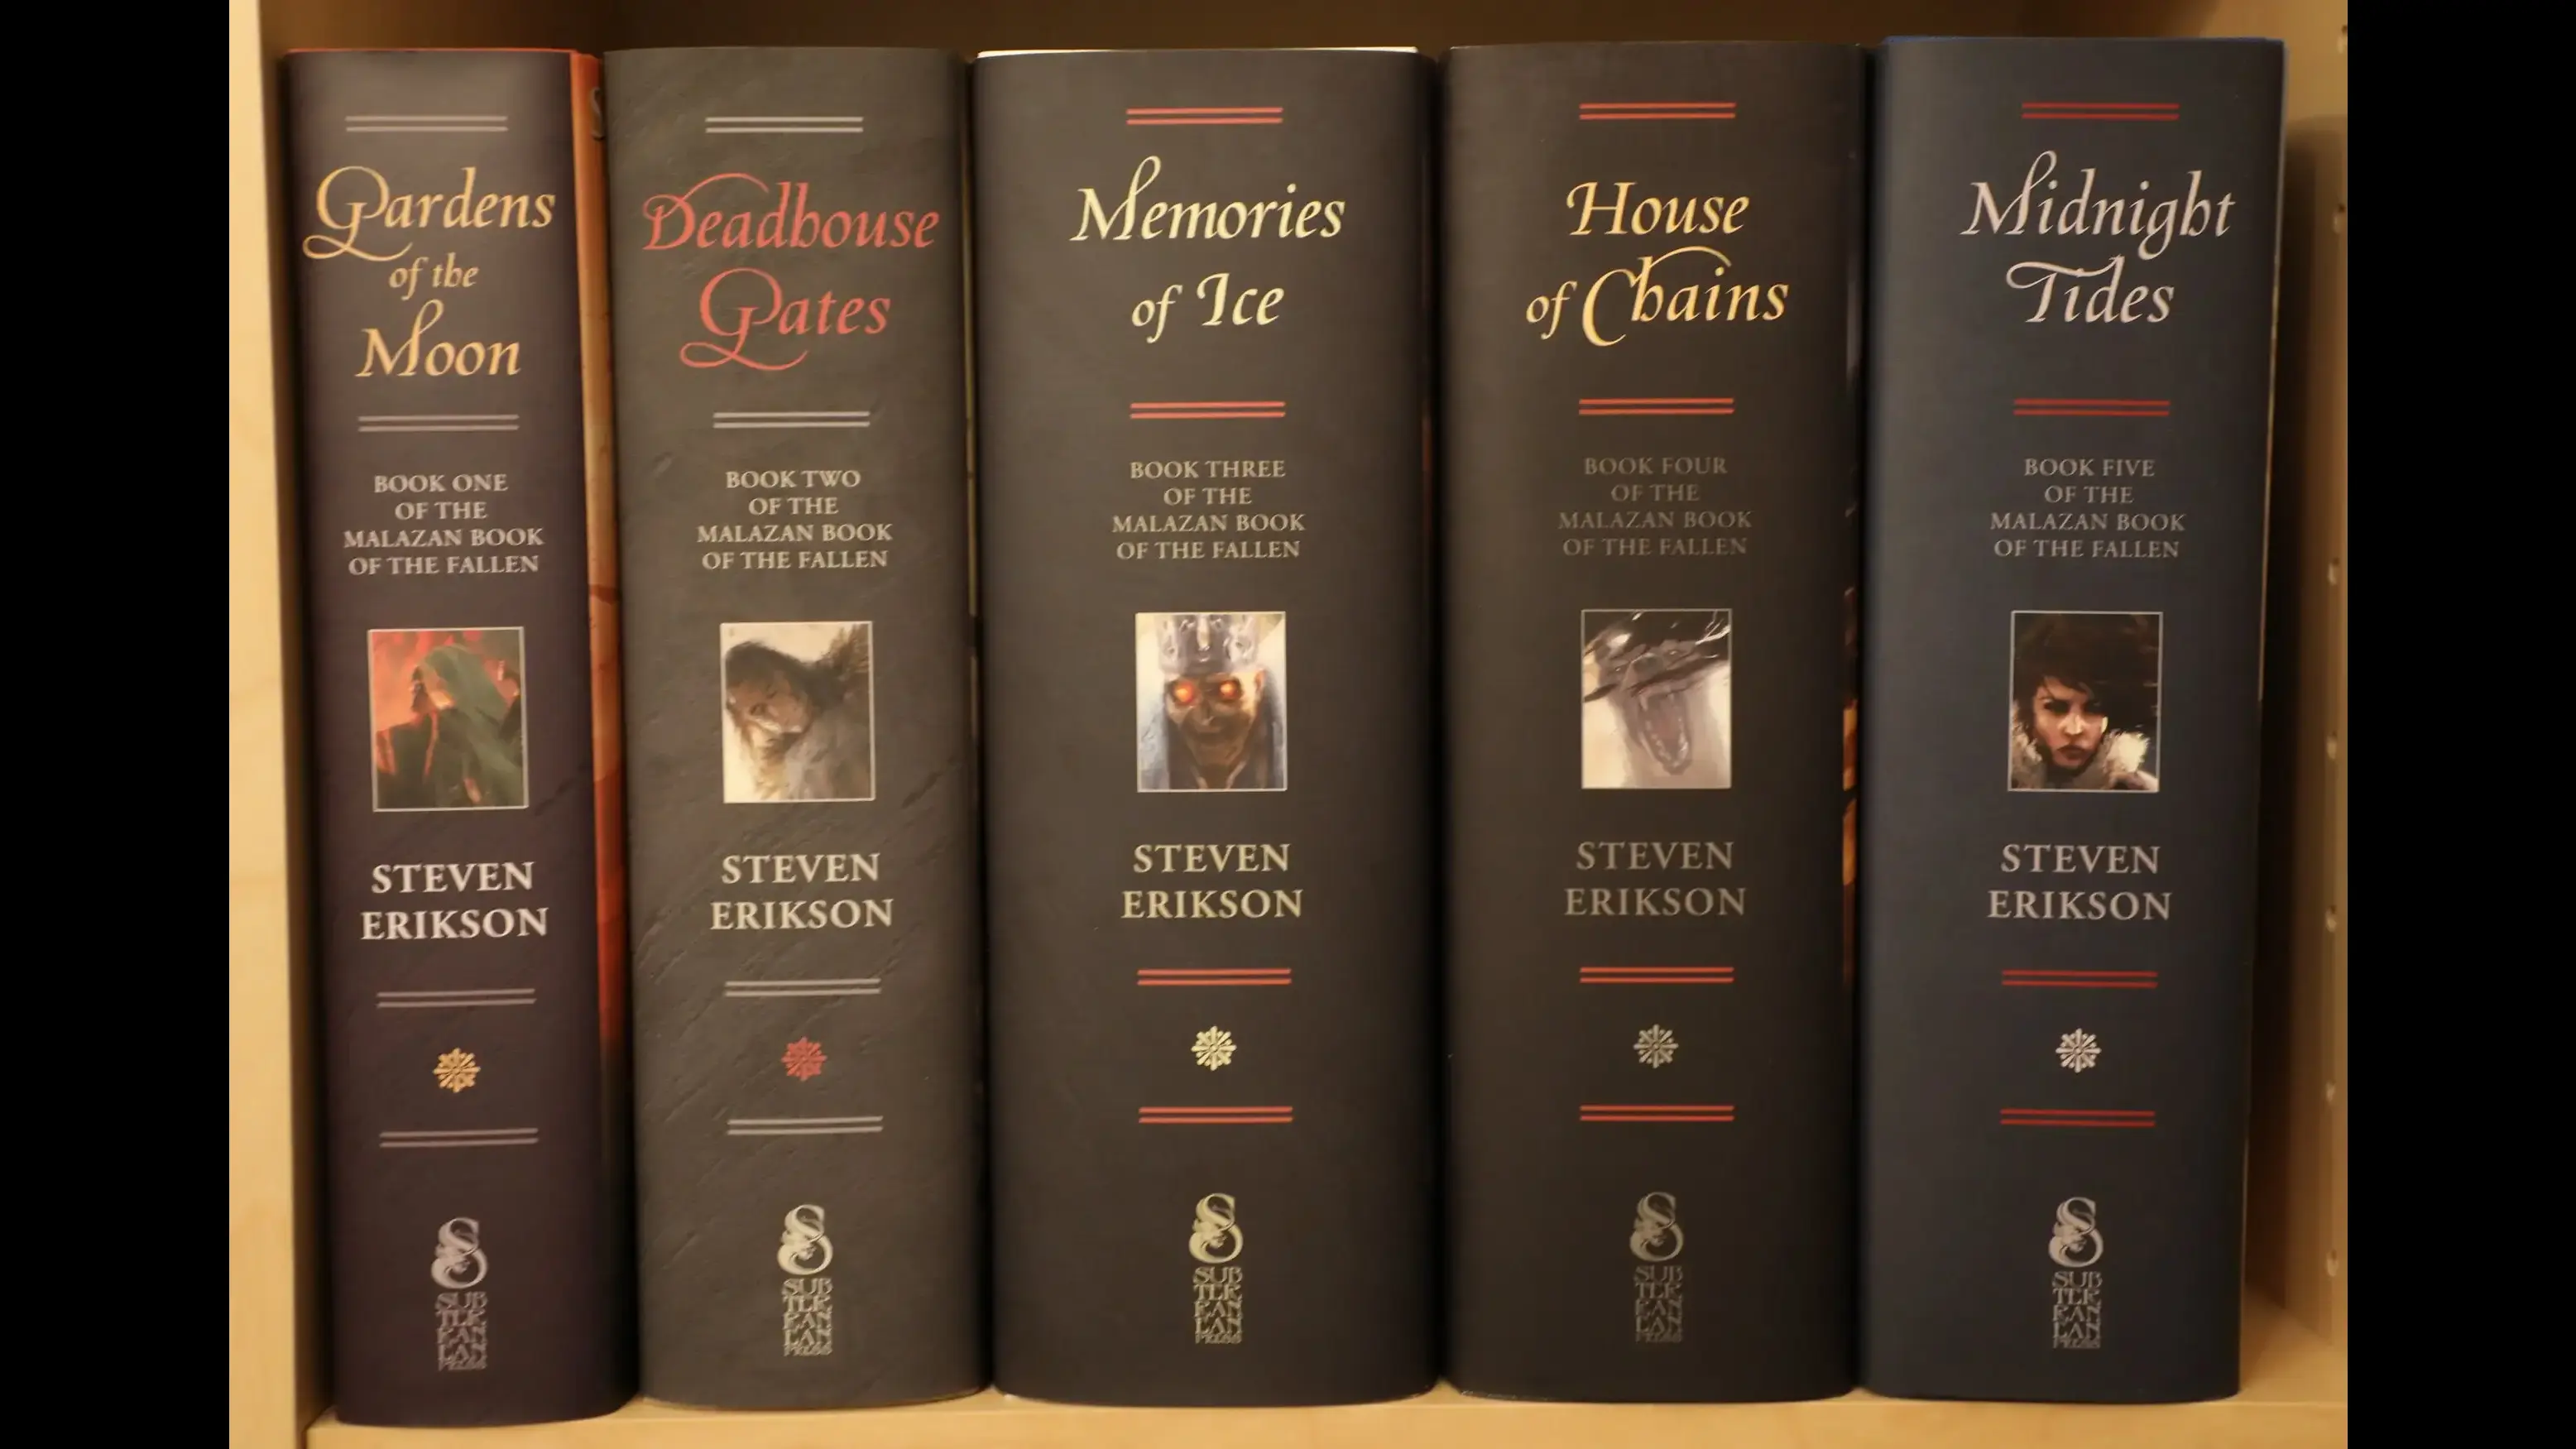 A Prelude to my Malazan Book of the Fallen Reading Challenge